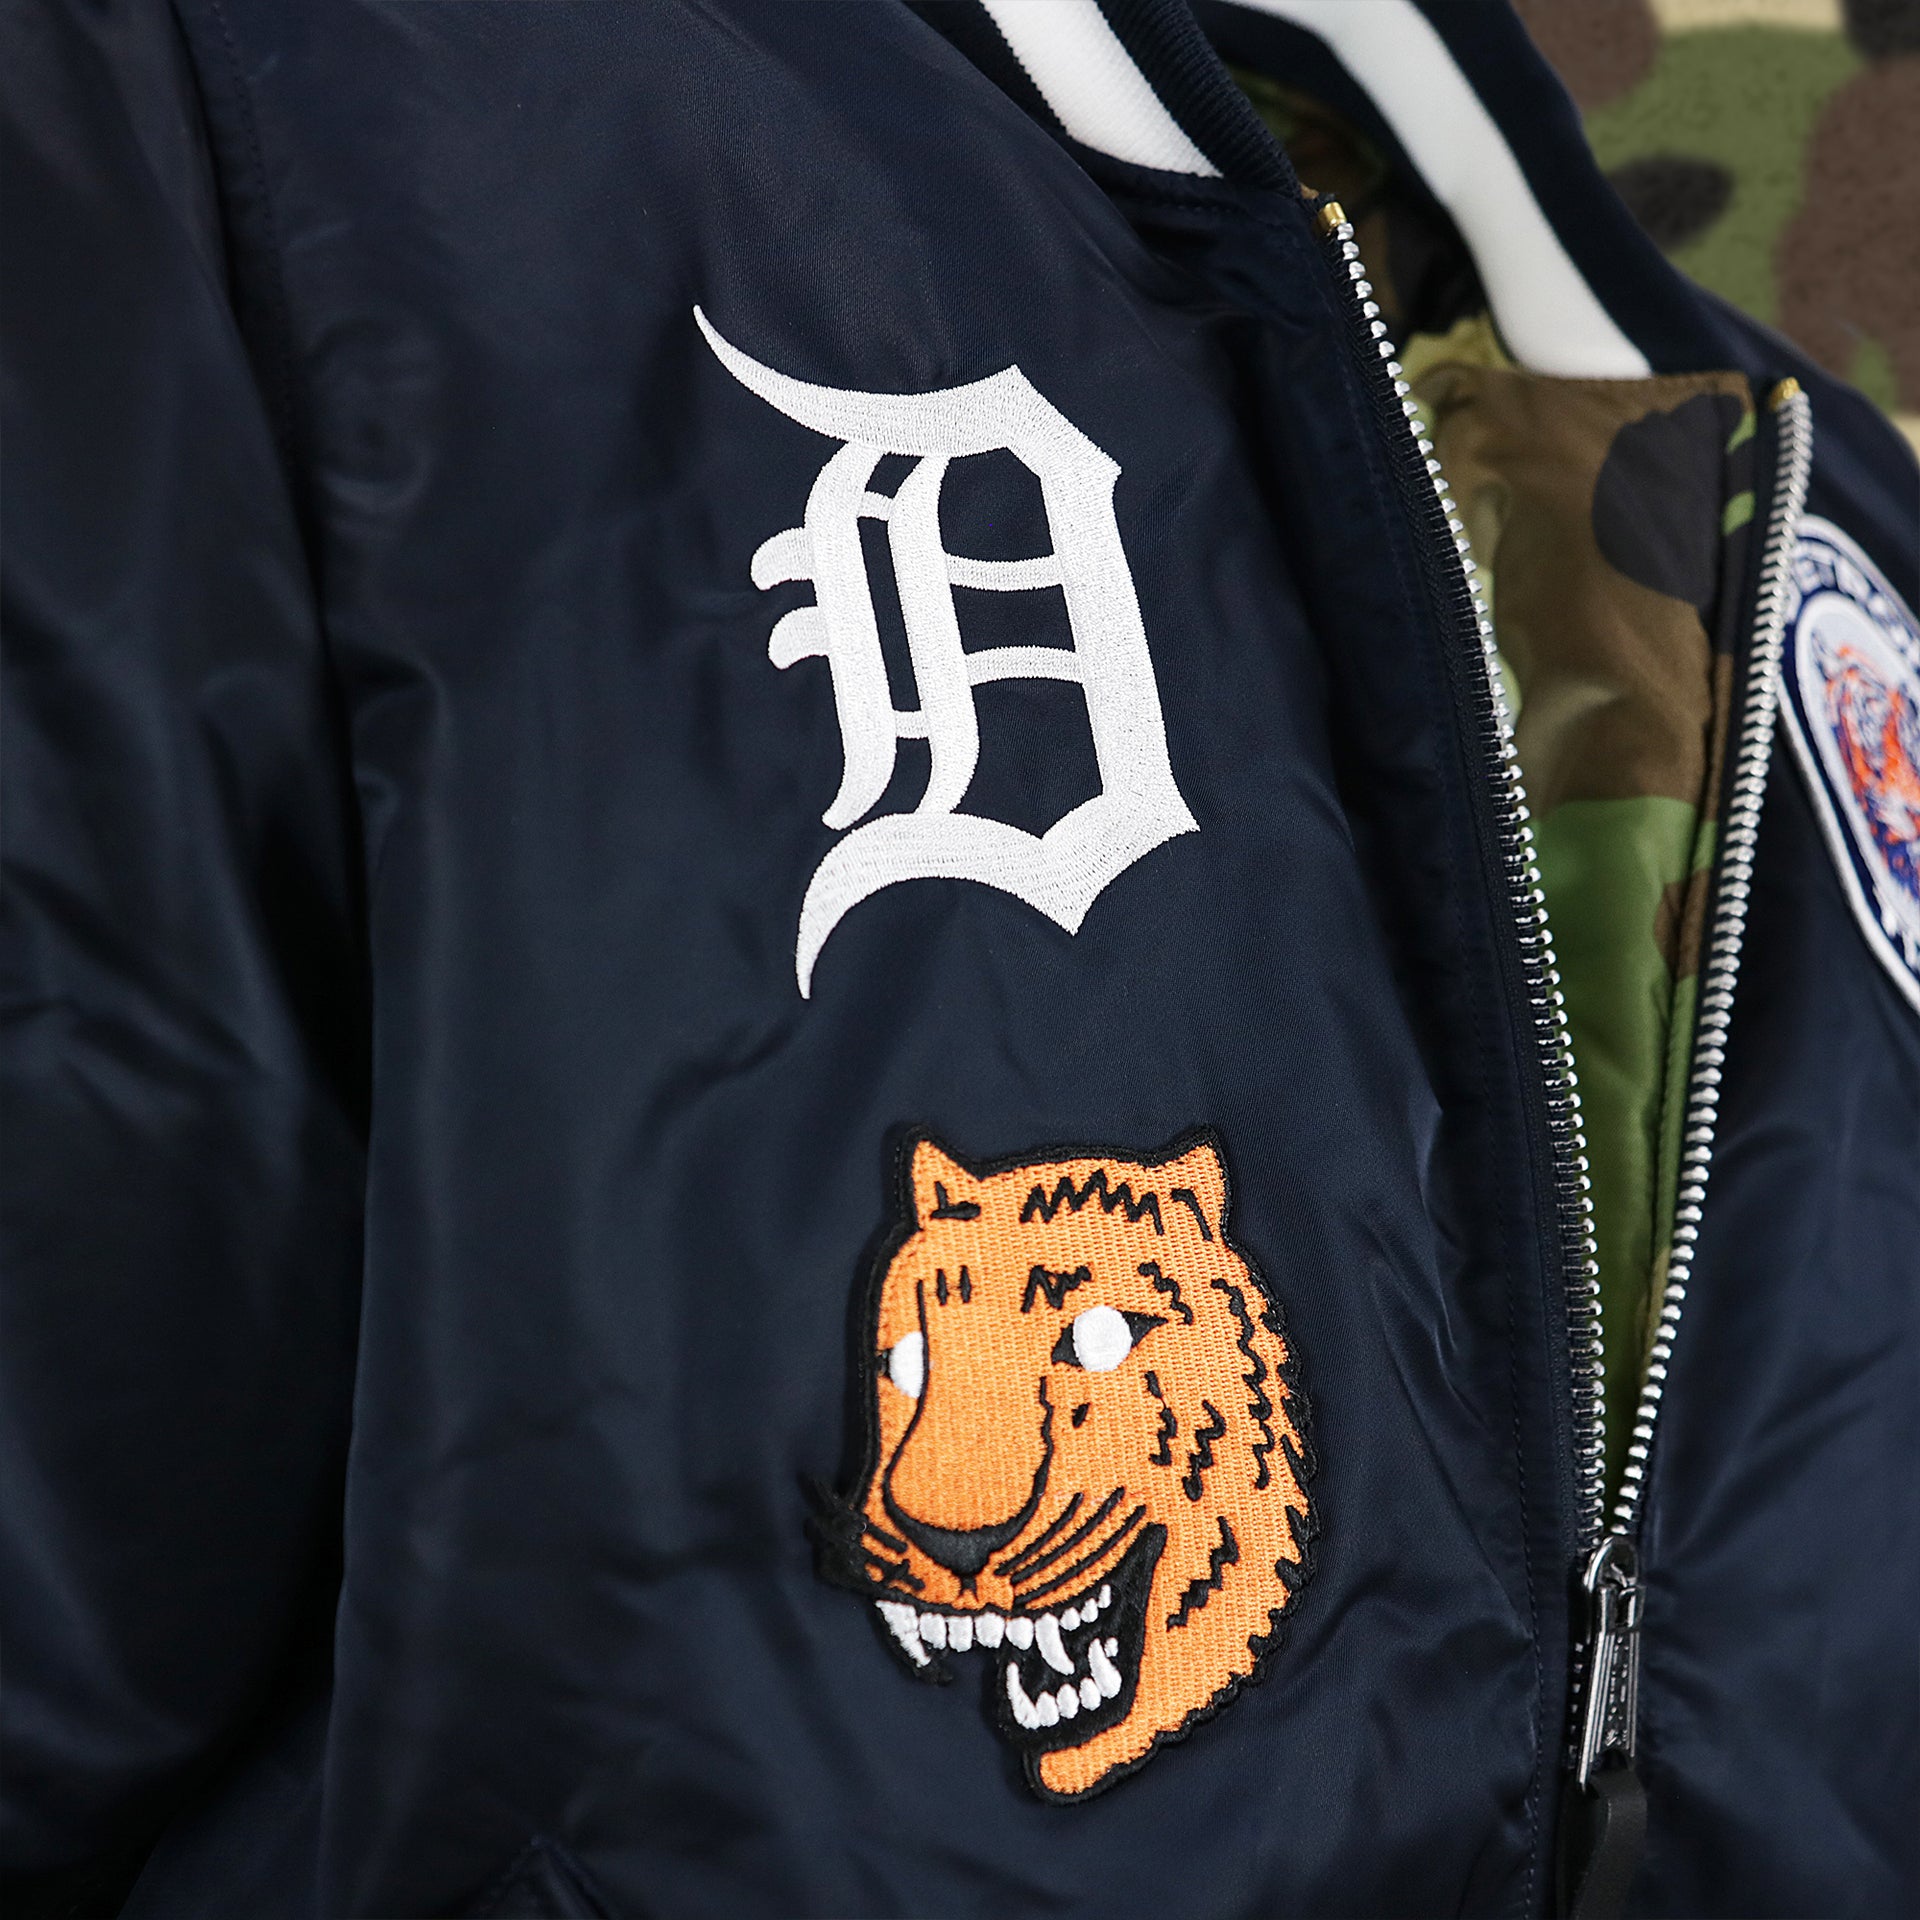 The Detroit Tigers Logo and the Retro Detroit Tigers Head Logo Side Patch